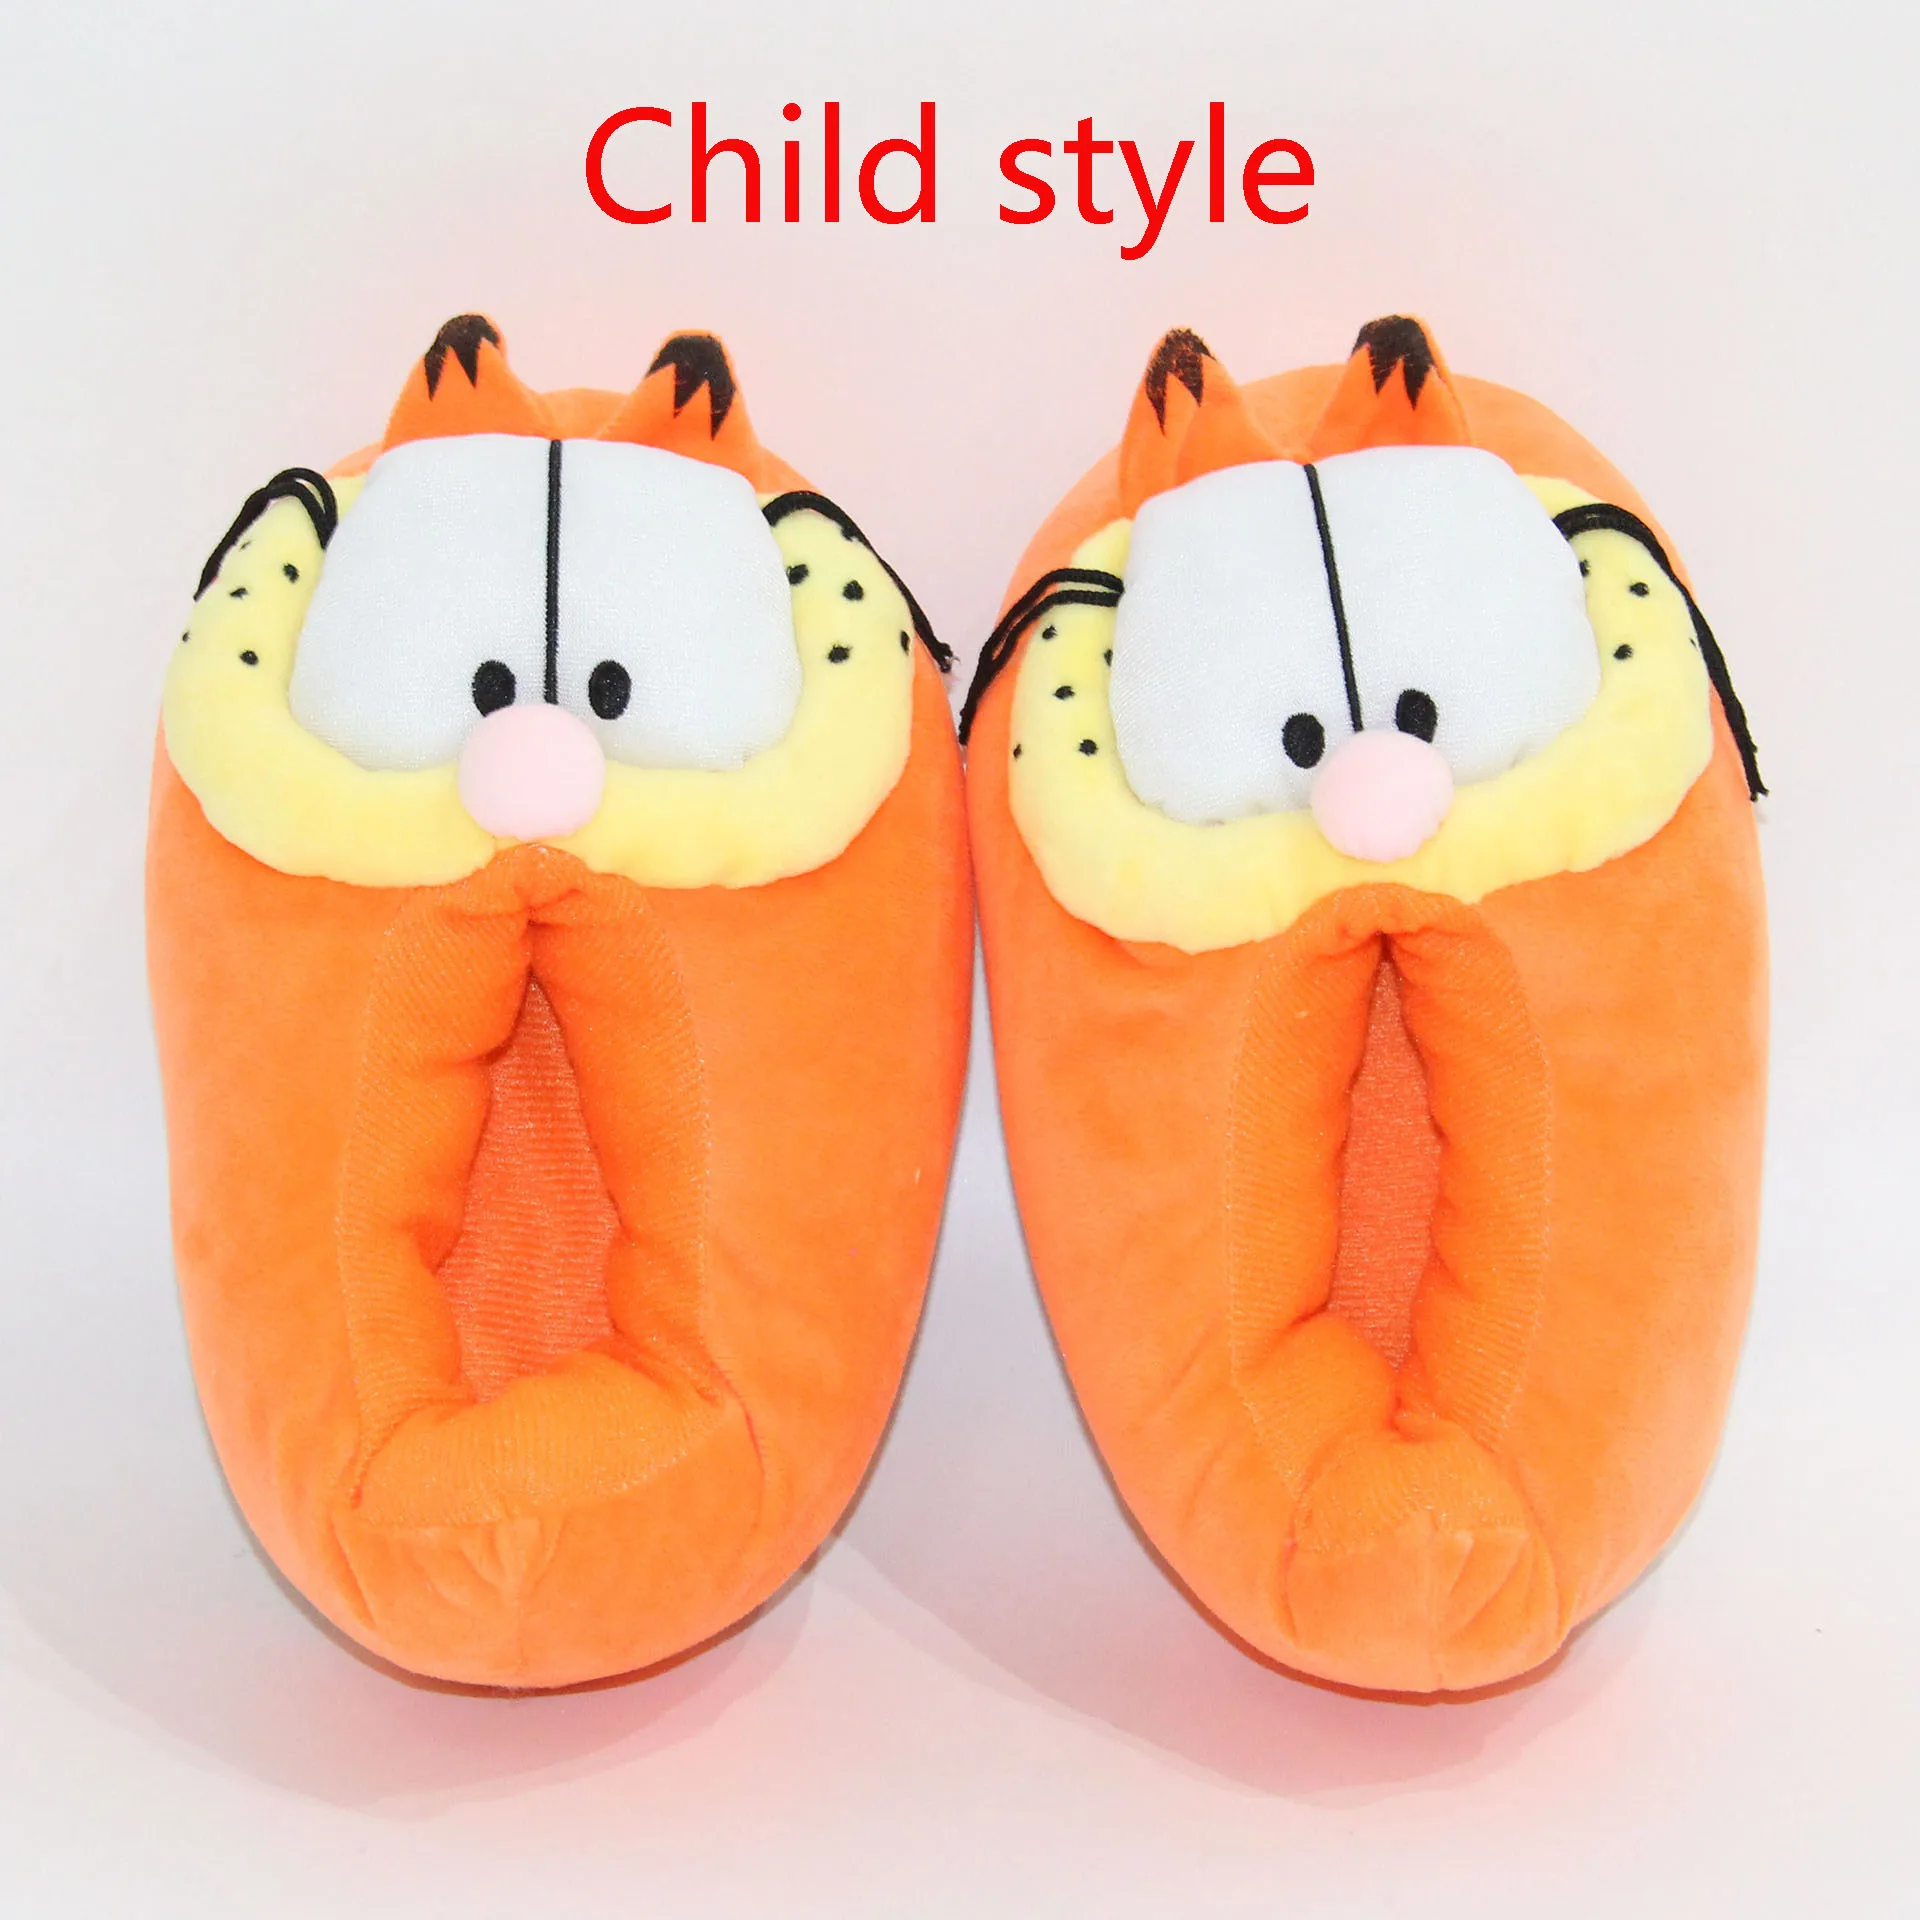 Winter children's plush cotton slippers blue hedgehog anime cosplay cartoon pattern boys and girls slippers cute home shoes